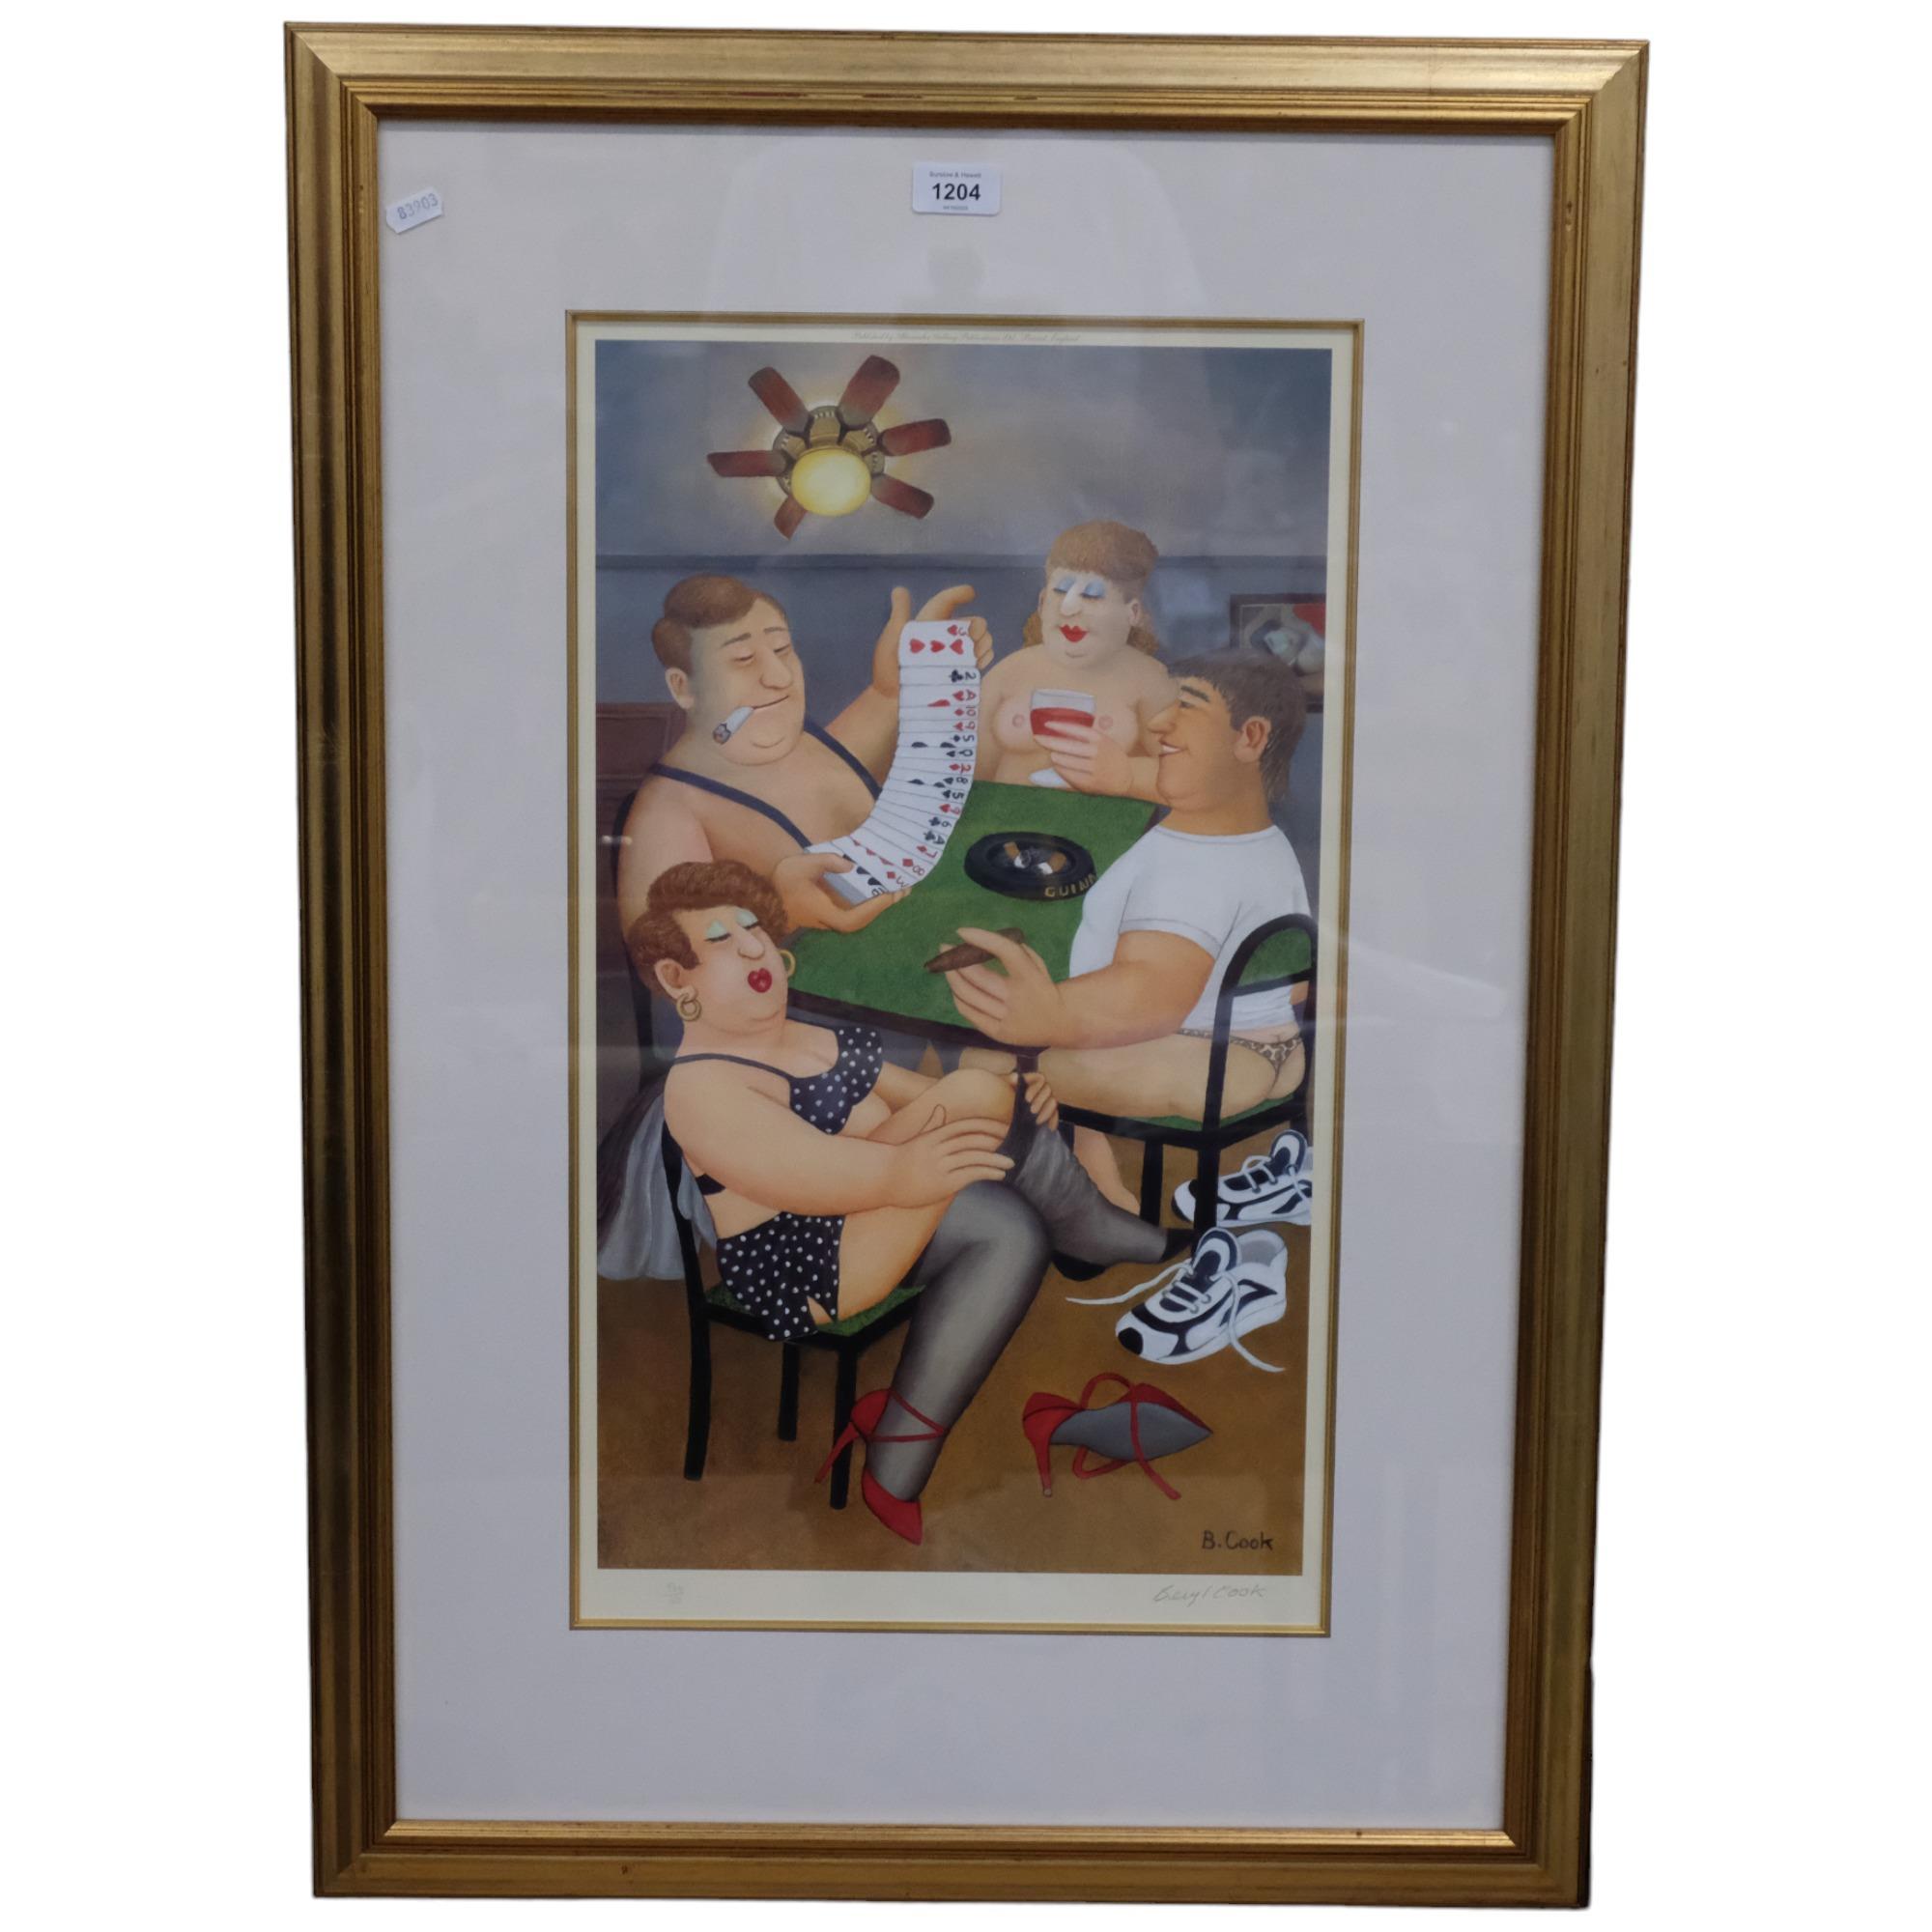 Beryl Cook, limited edition coloured print, 564/650, "strip poker", pencil signed lower right,